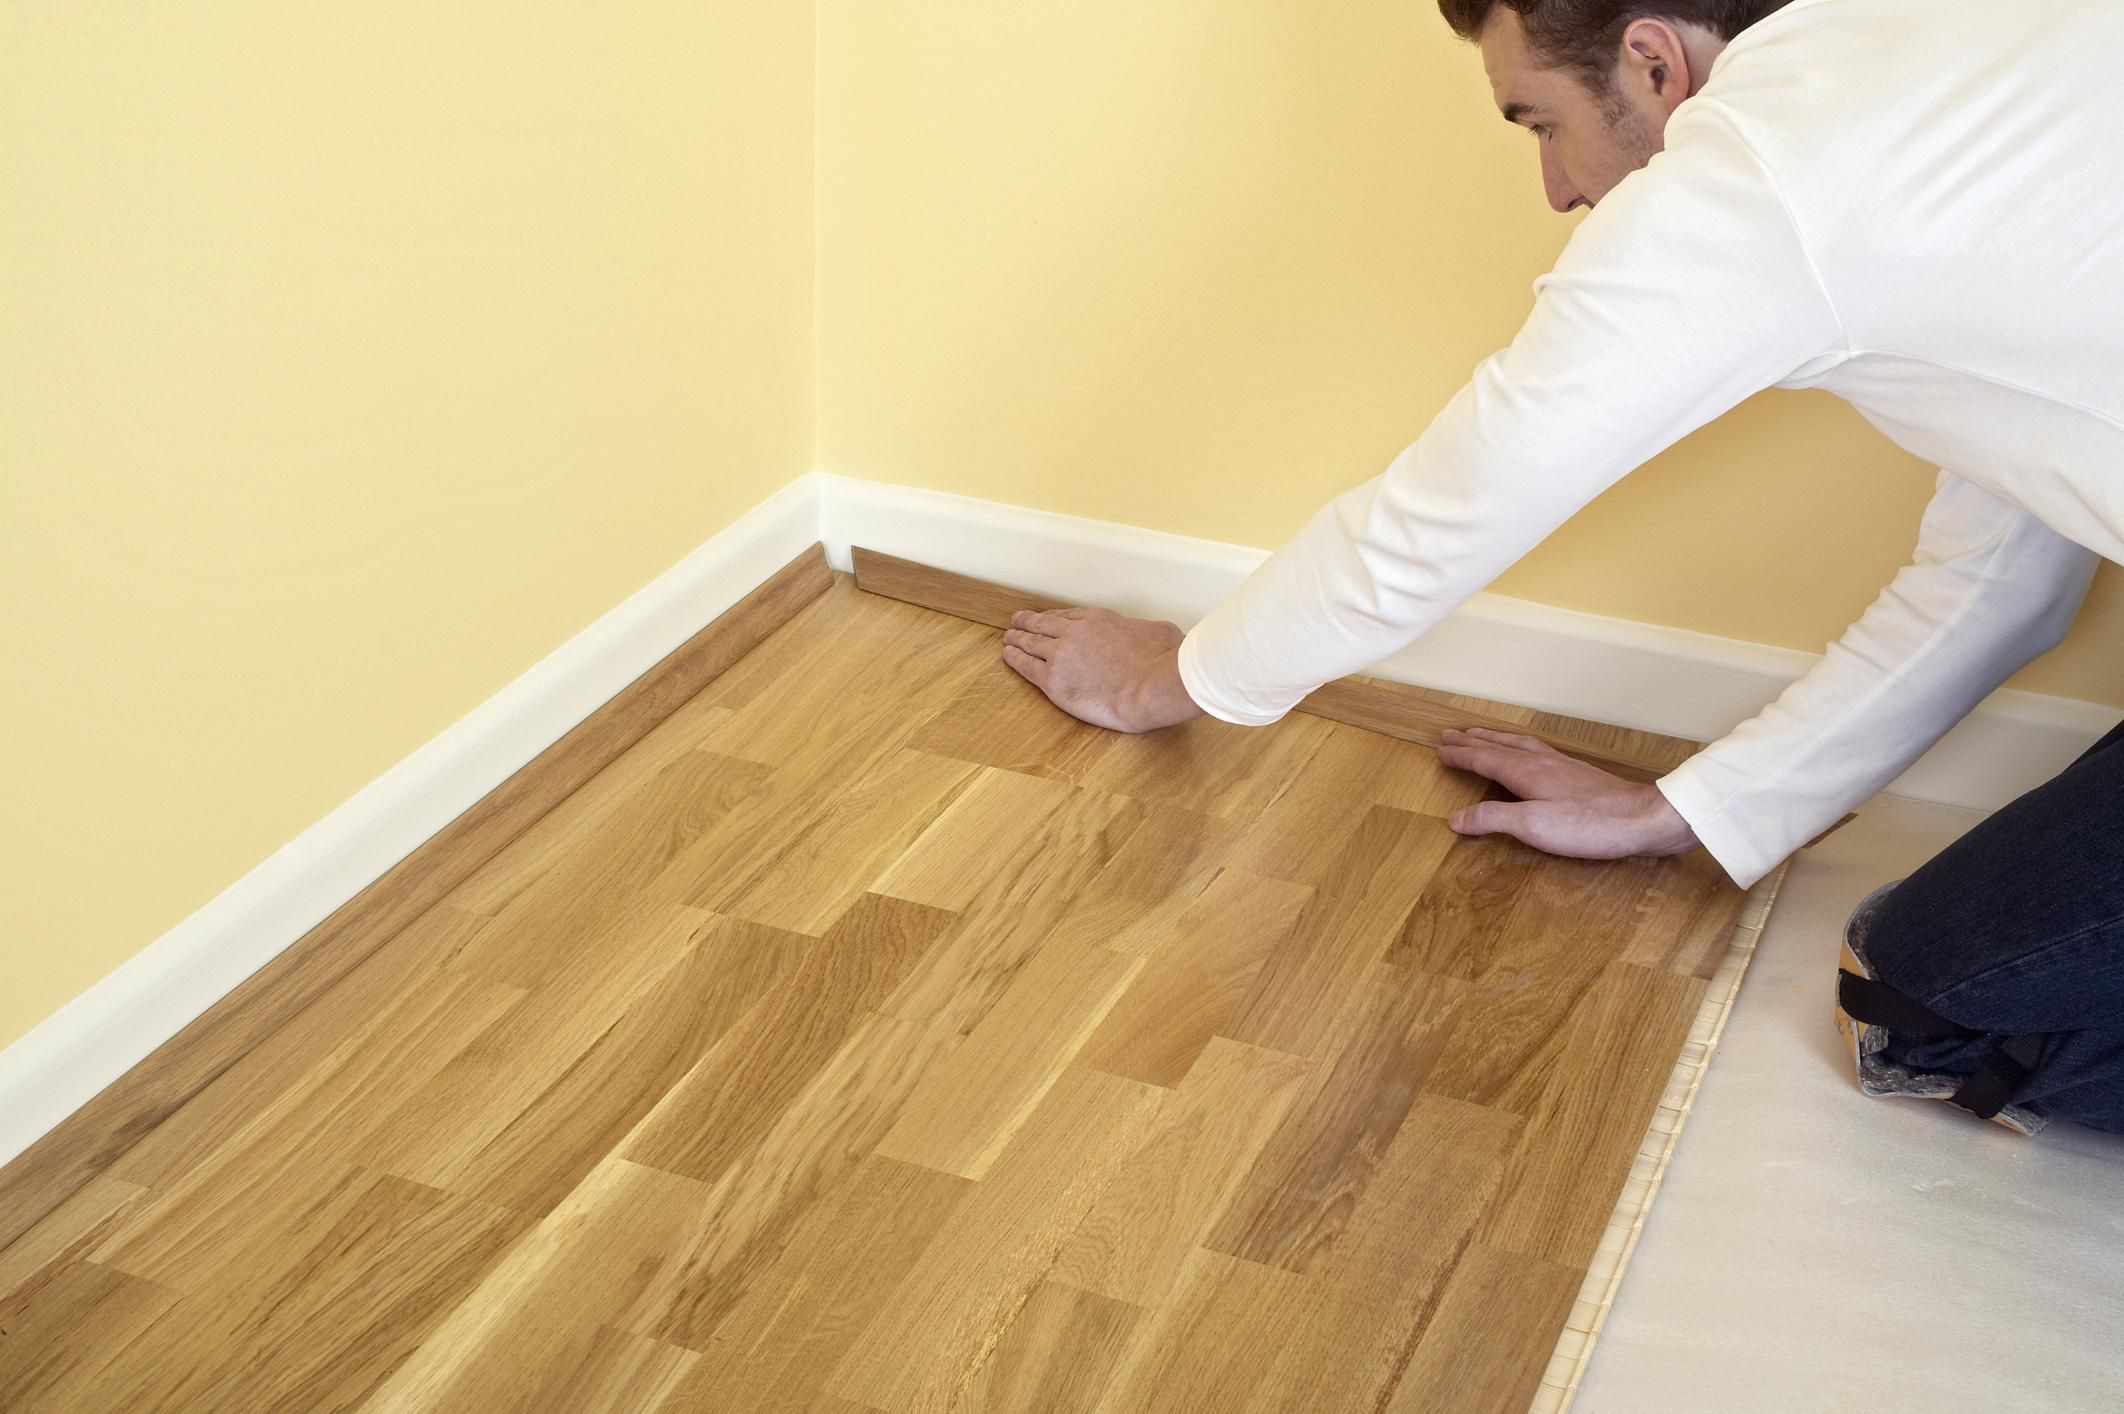 29 Recommended Pros and Cons Of Laminate Flooring Versus Hardwood 2024 free download pros and cons of laminate flooring versus hardwood of basics of 12 mm laminate flooring within 80033008 56a49f155f9b58b7d0d7e0be